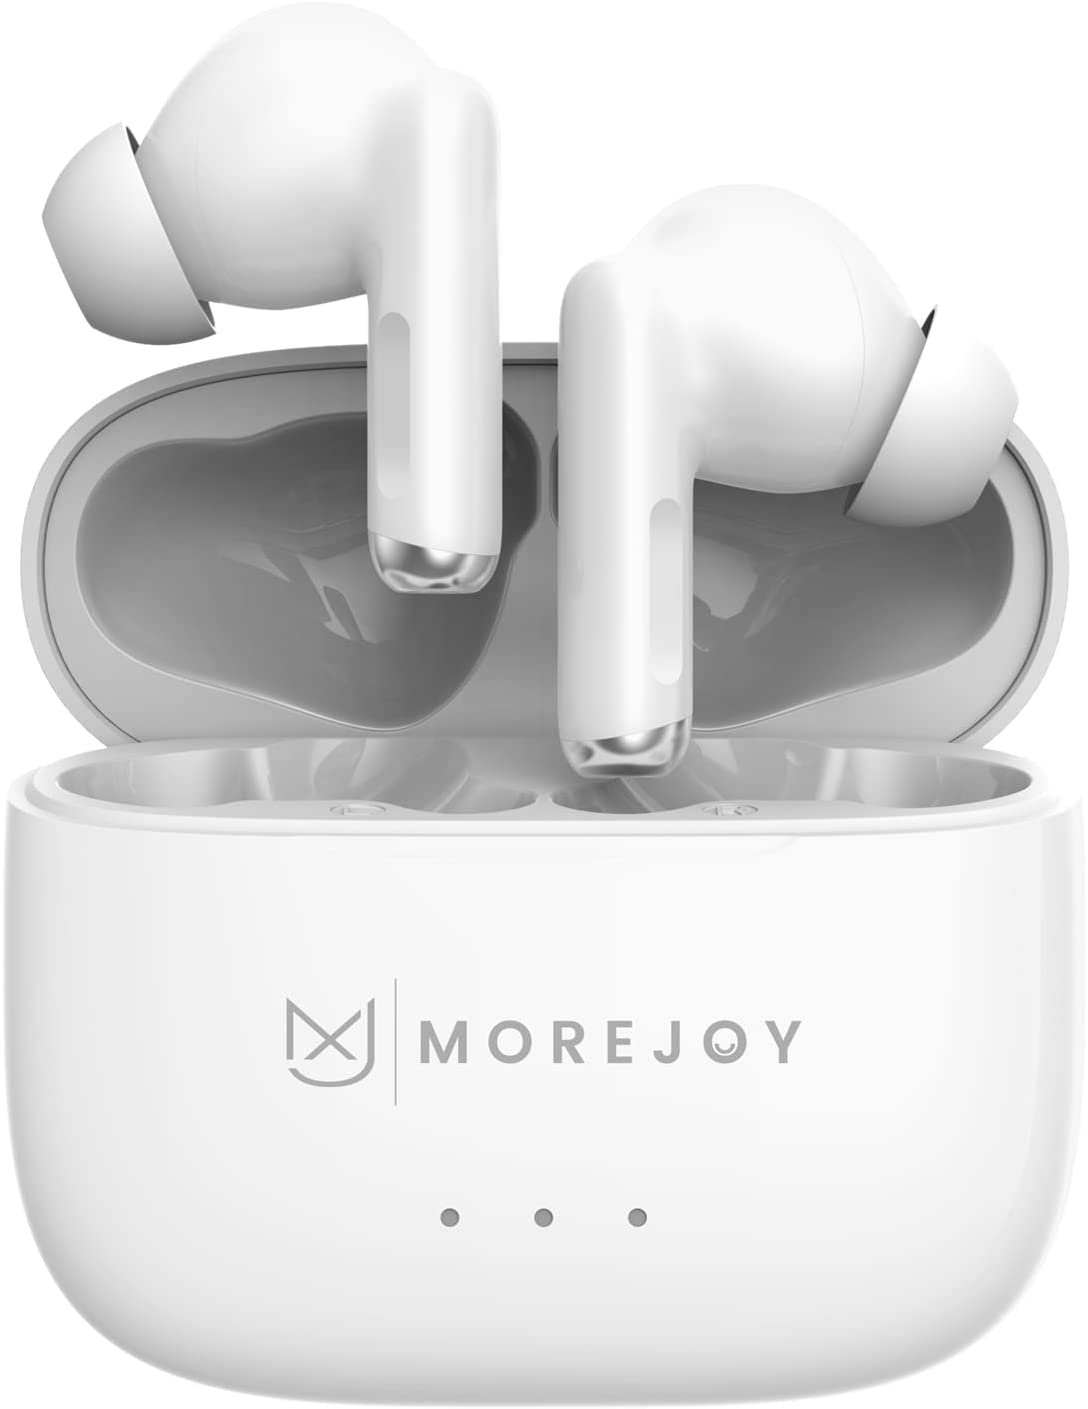 MoreJoy MJ141 Jouirbuds Pro Hybrid ANC Wireless Earbuds Active Noise Cancelling Headphones Bluetooth 5.2 Stereo in Ear Earphones, Immersive Sound Premium Deep Bass Built in 6 Mic Headset, White